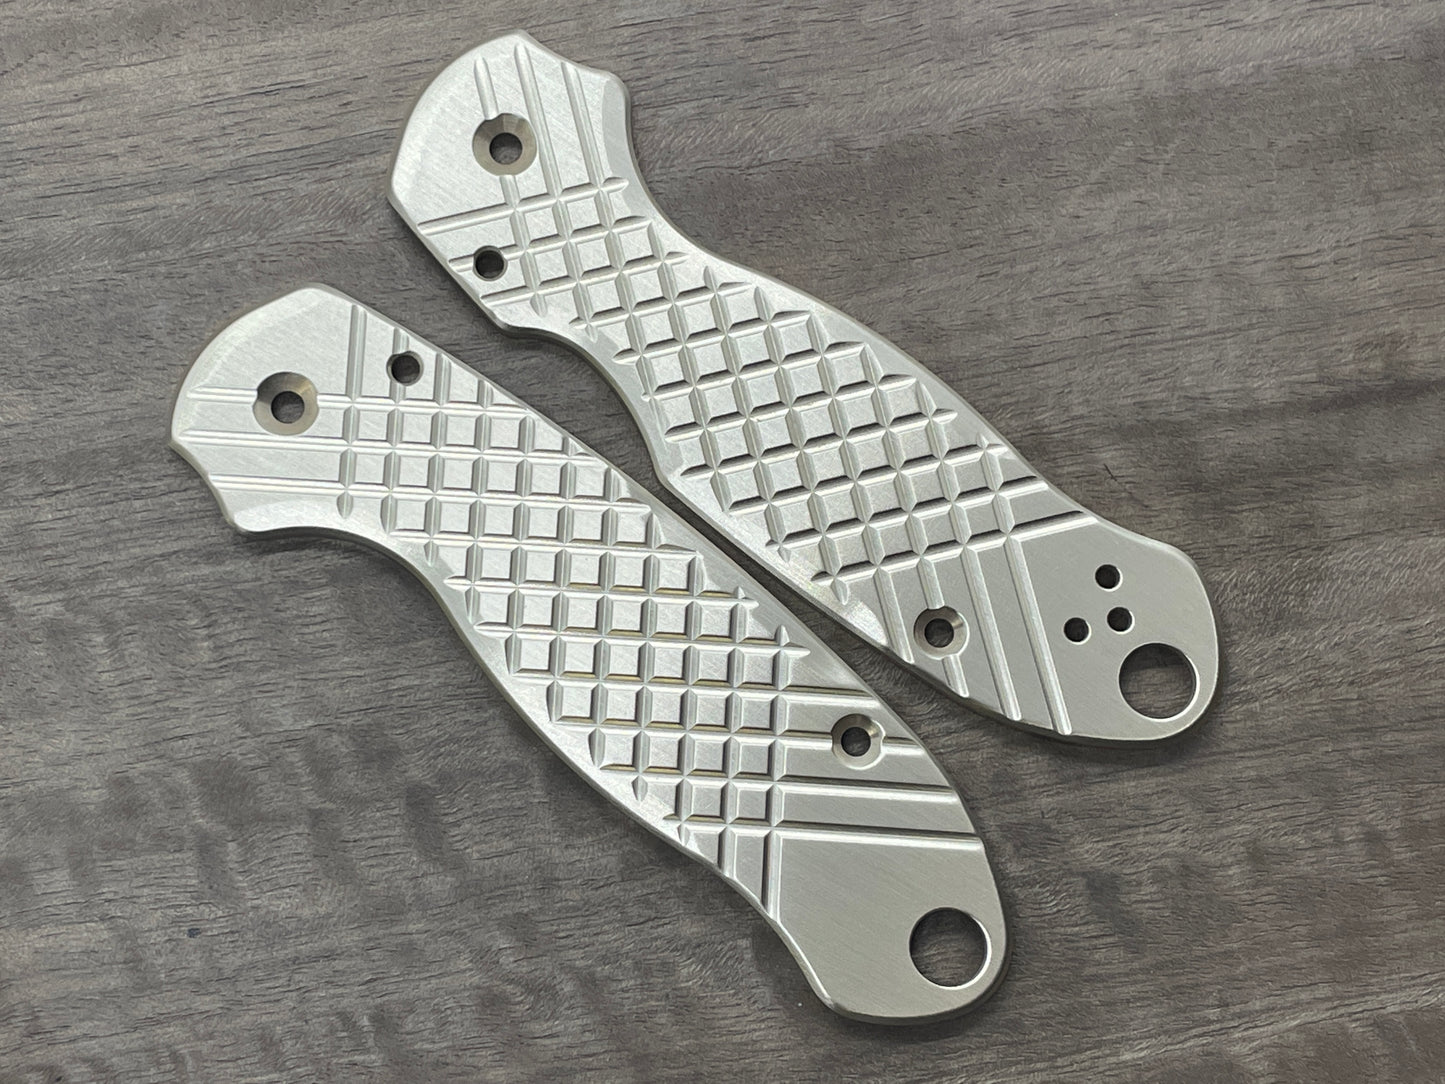 FRAG Cnc milled Brushed BRASS Scales for Spyderco Para 3